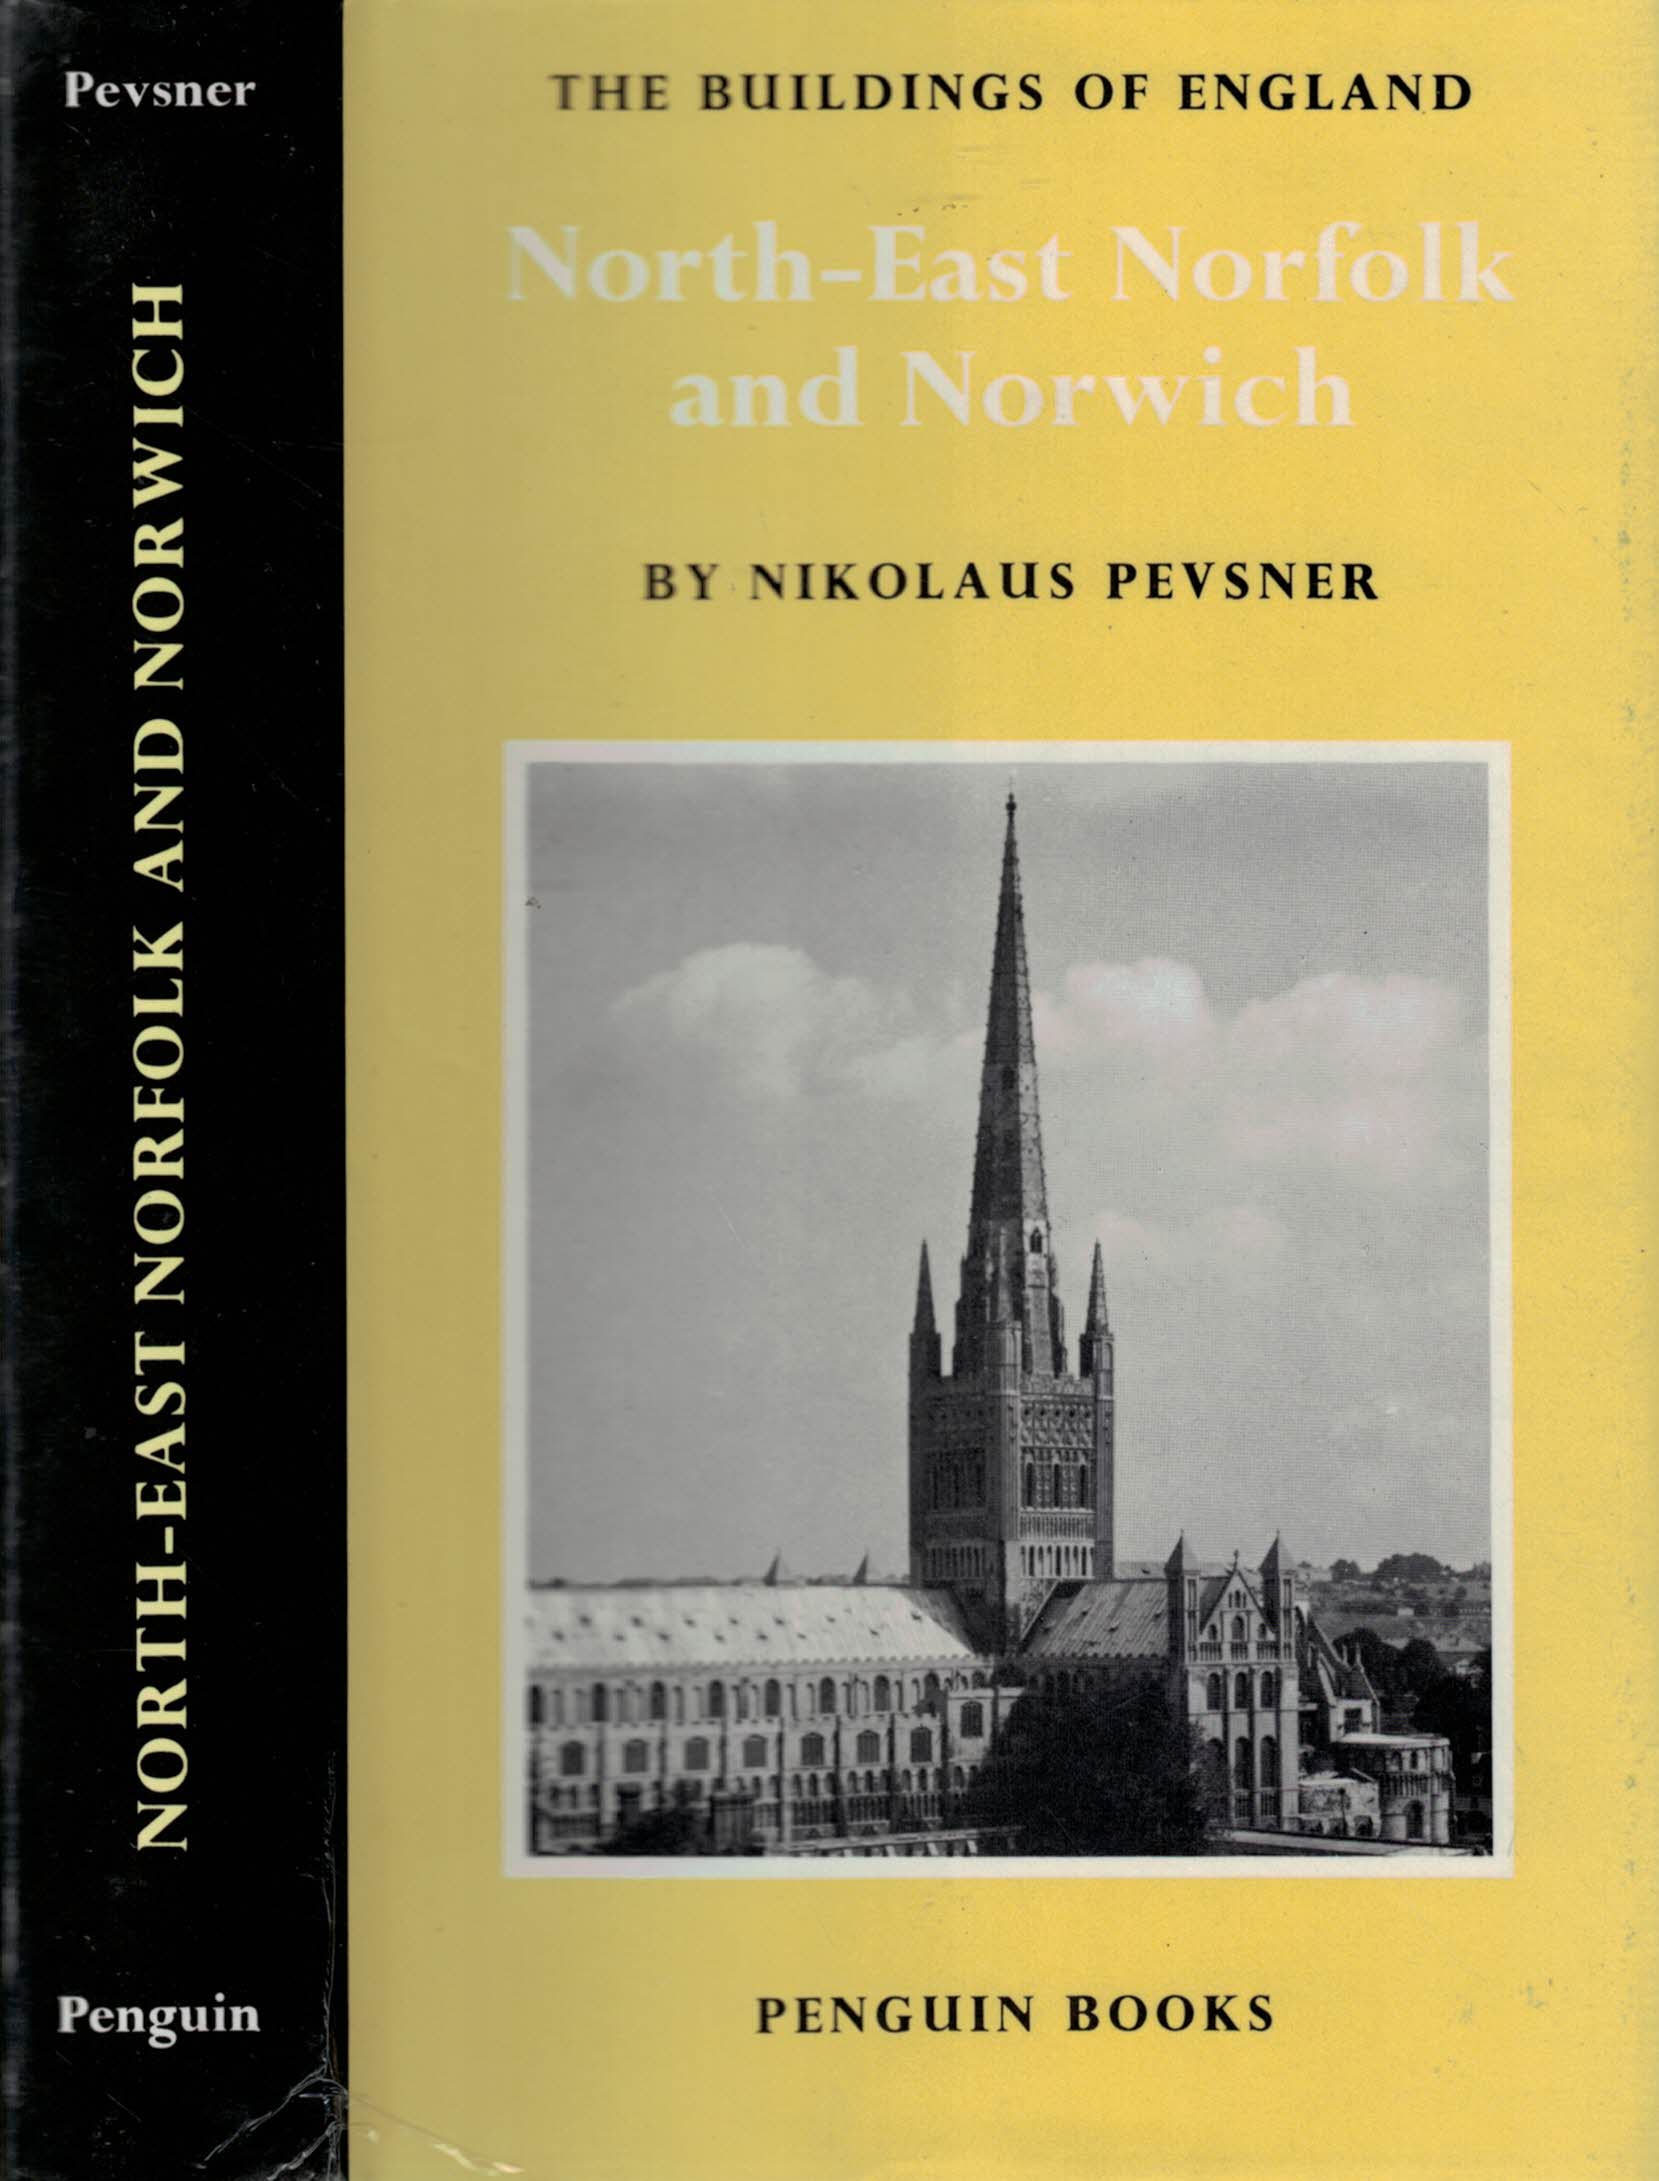 North-East Norfolk and Norwich. The Buildings of England. BE 23. 1988.